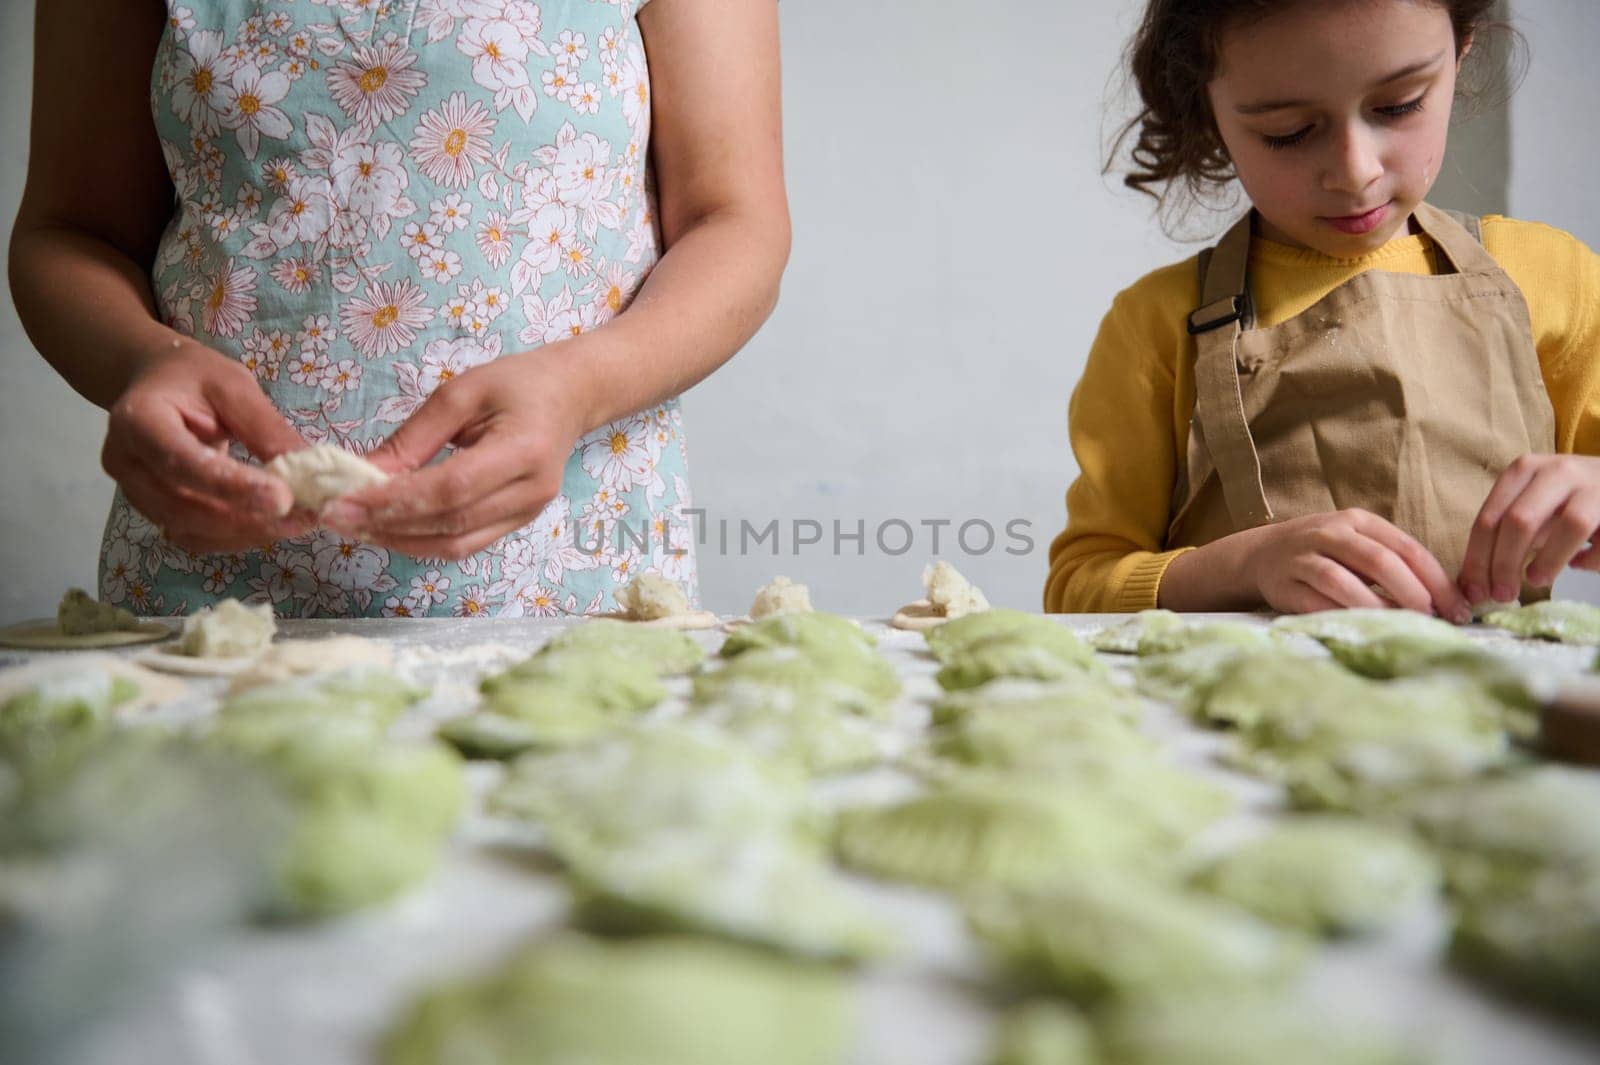 Focus on molded homemade dumplings on floured table against the background of young mom and daughter cooking together. Ravioli. Pelmeni. Varennyky stuffed with mashed potatoes by artgf